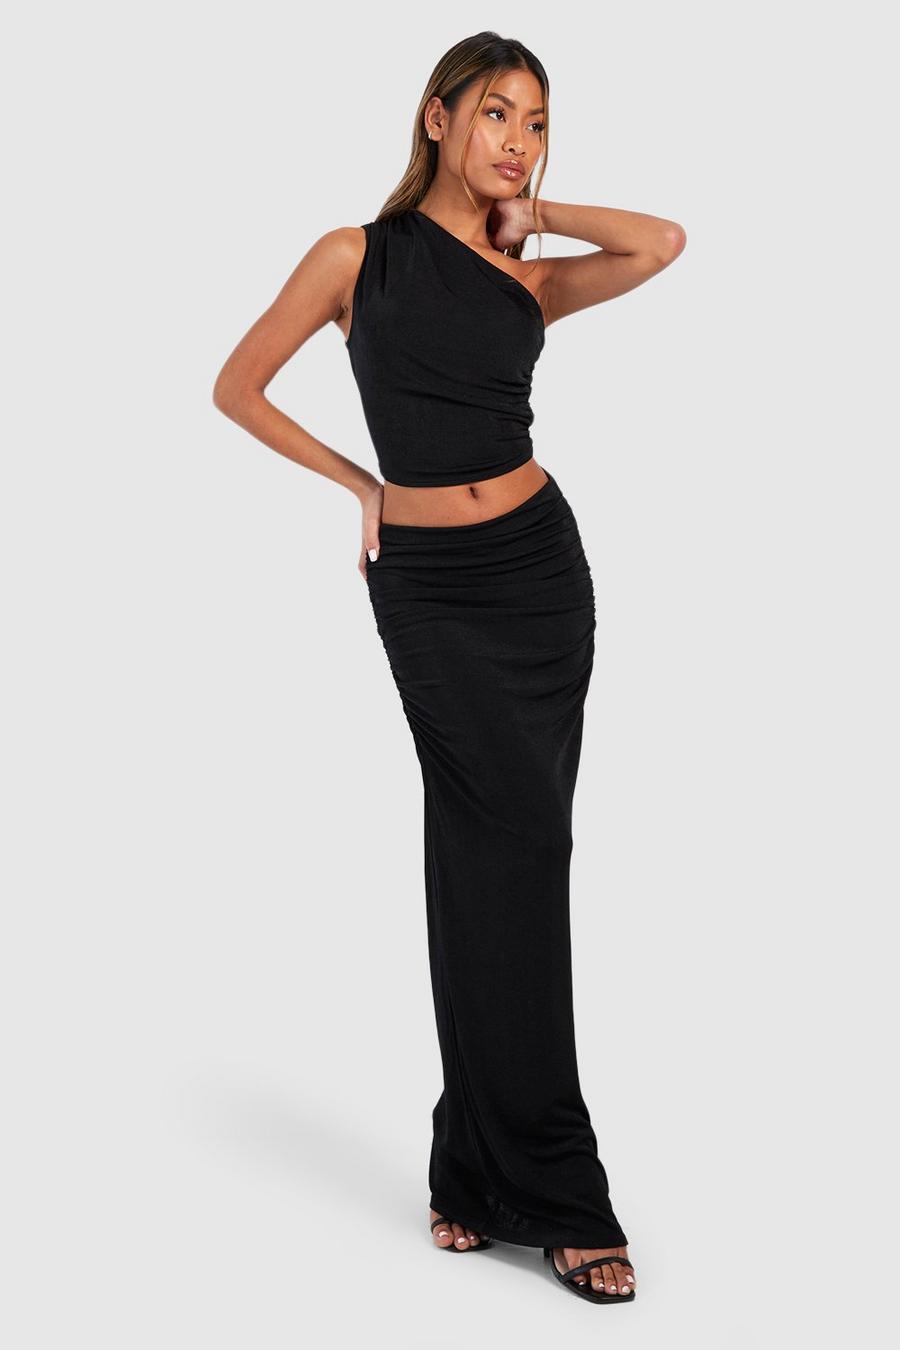 Black Acetate Slinky Asymmetric Ruched Top & Ruched Maxi Skirt